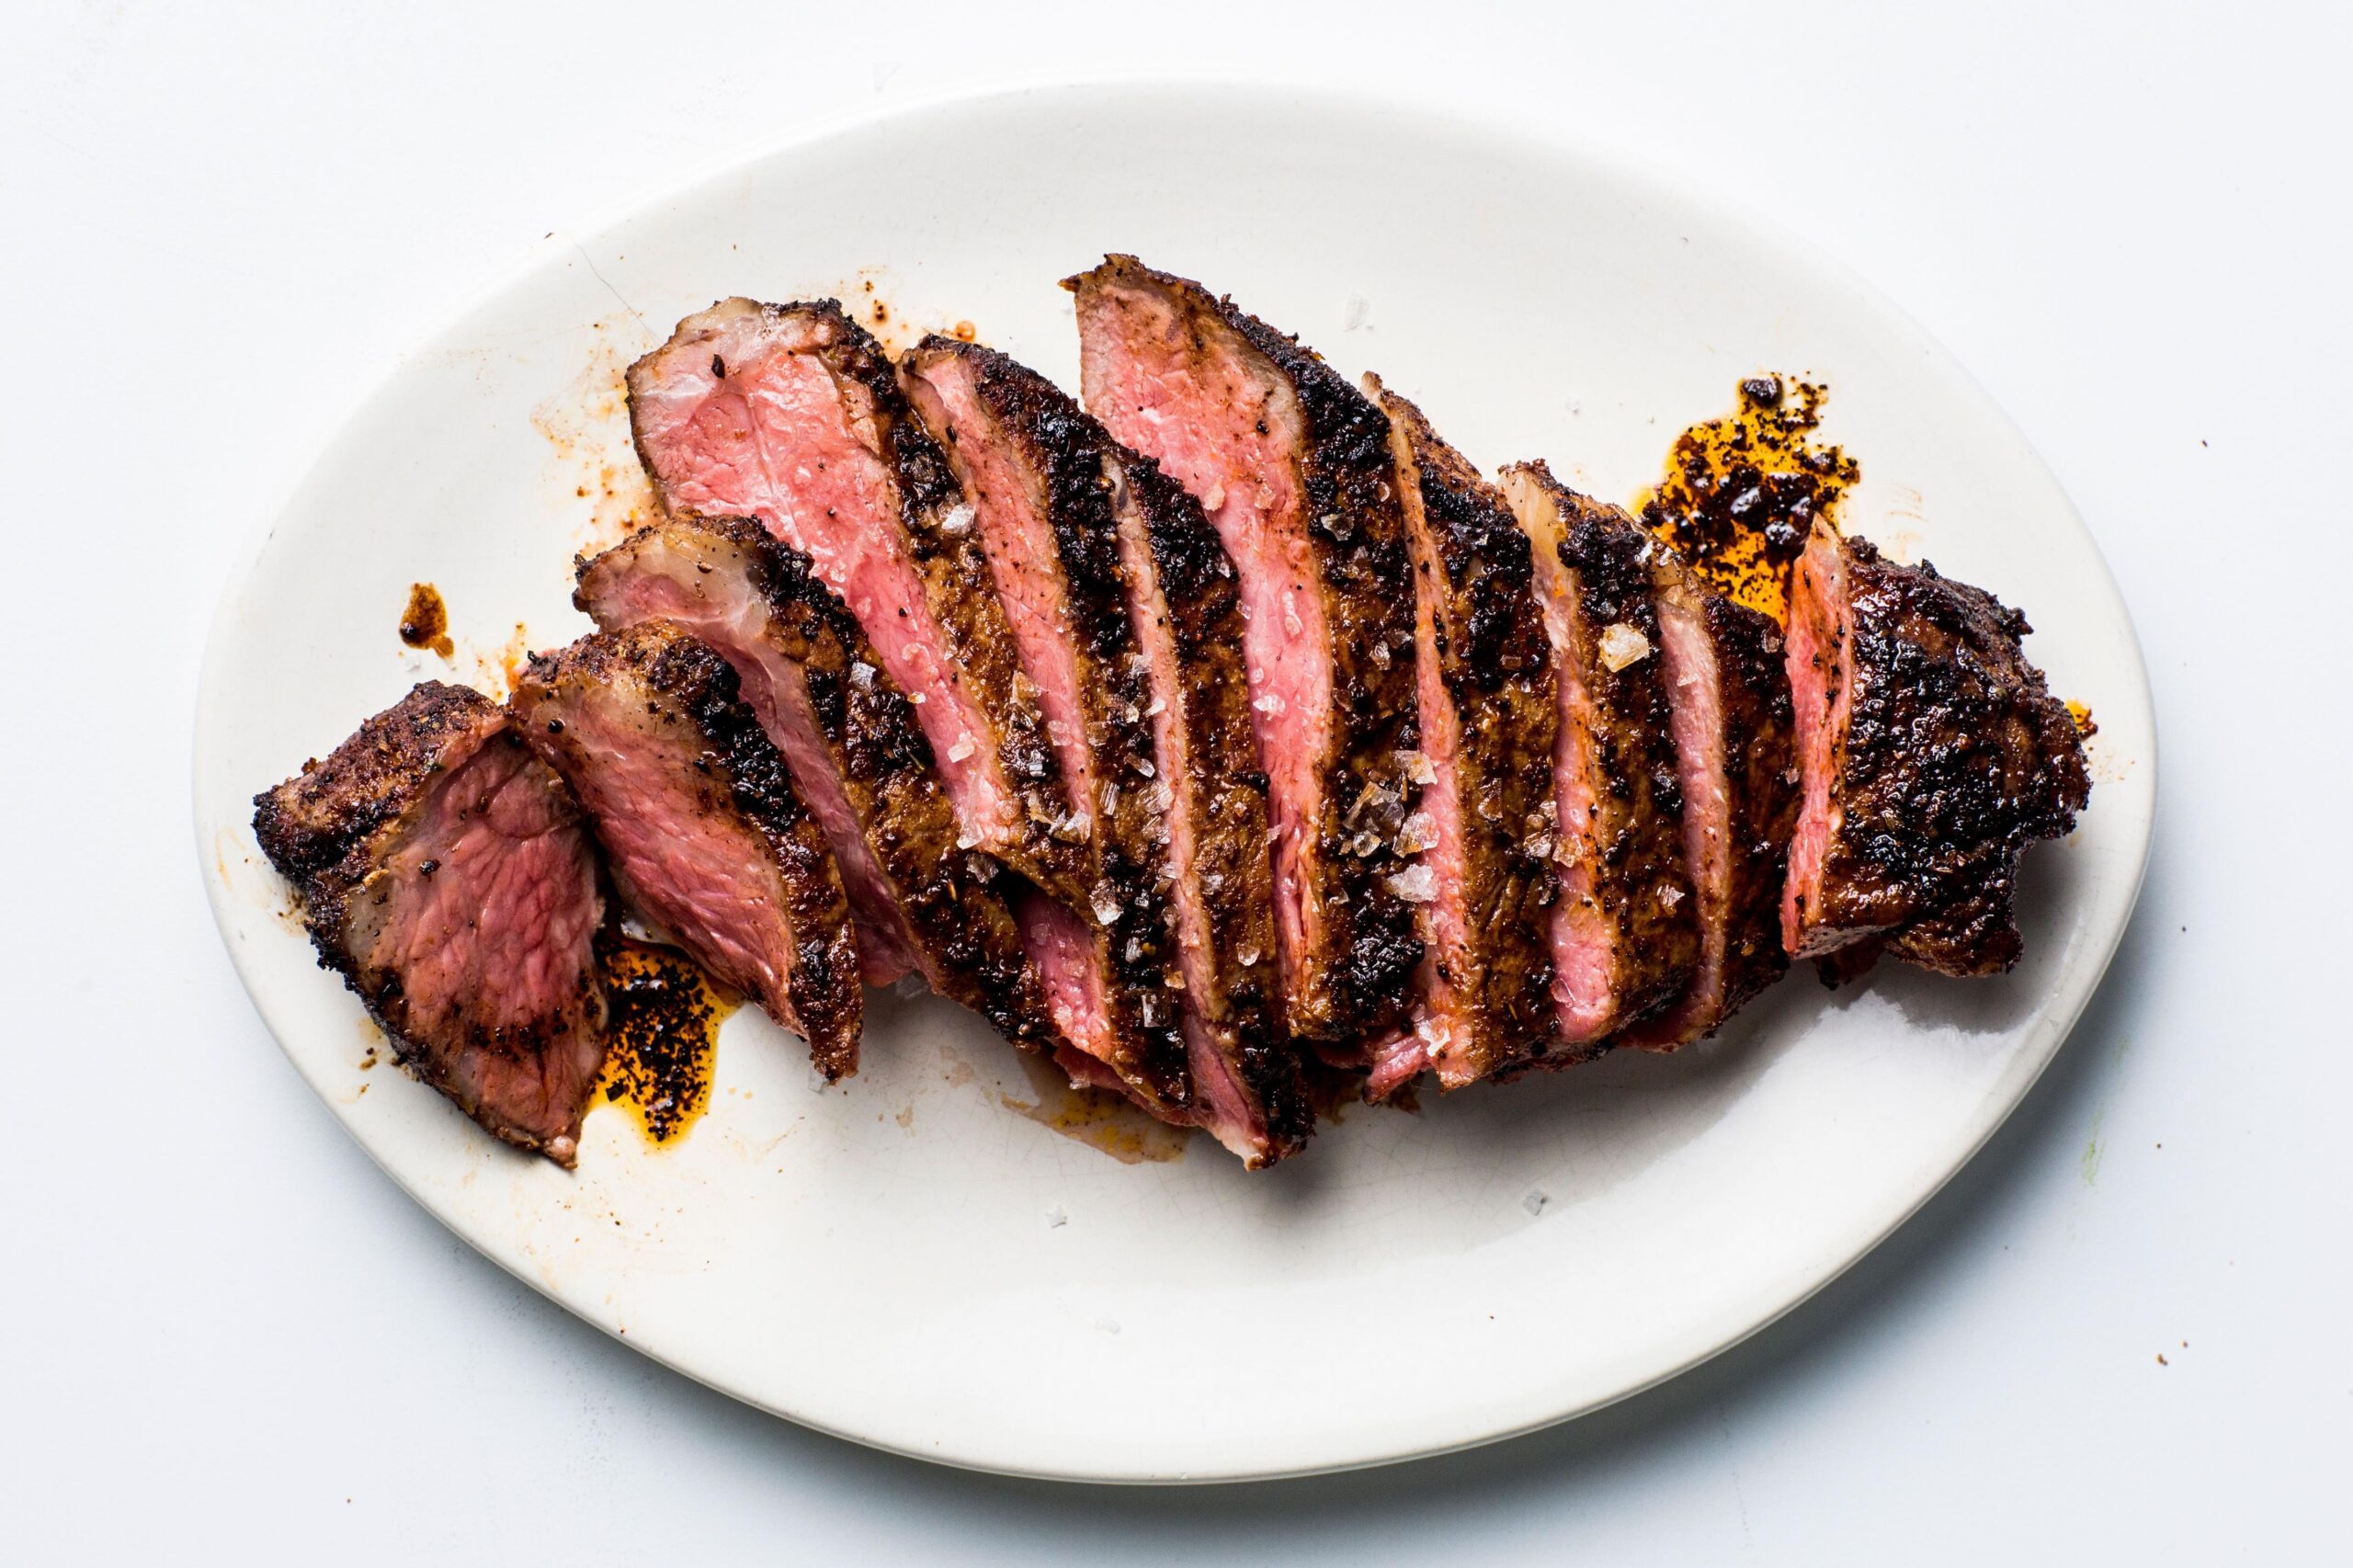  Trust me, this is the most flavorful steak you'll ever have.